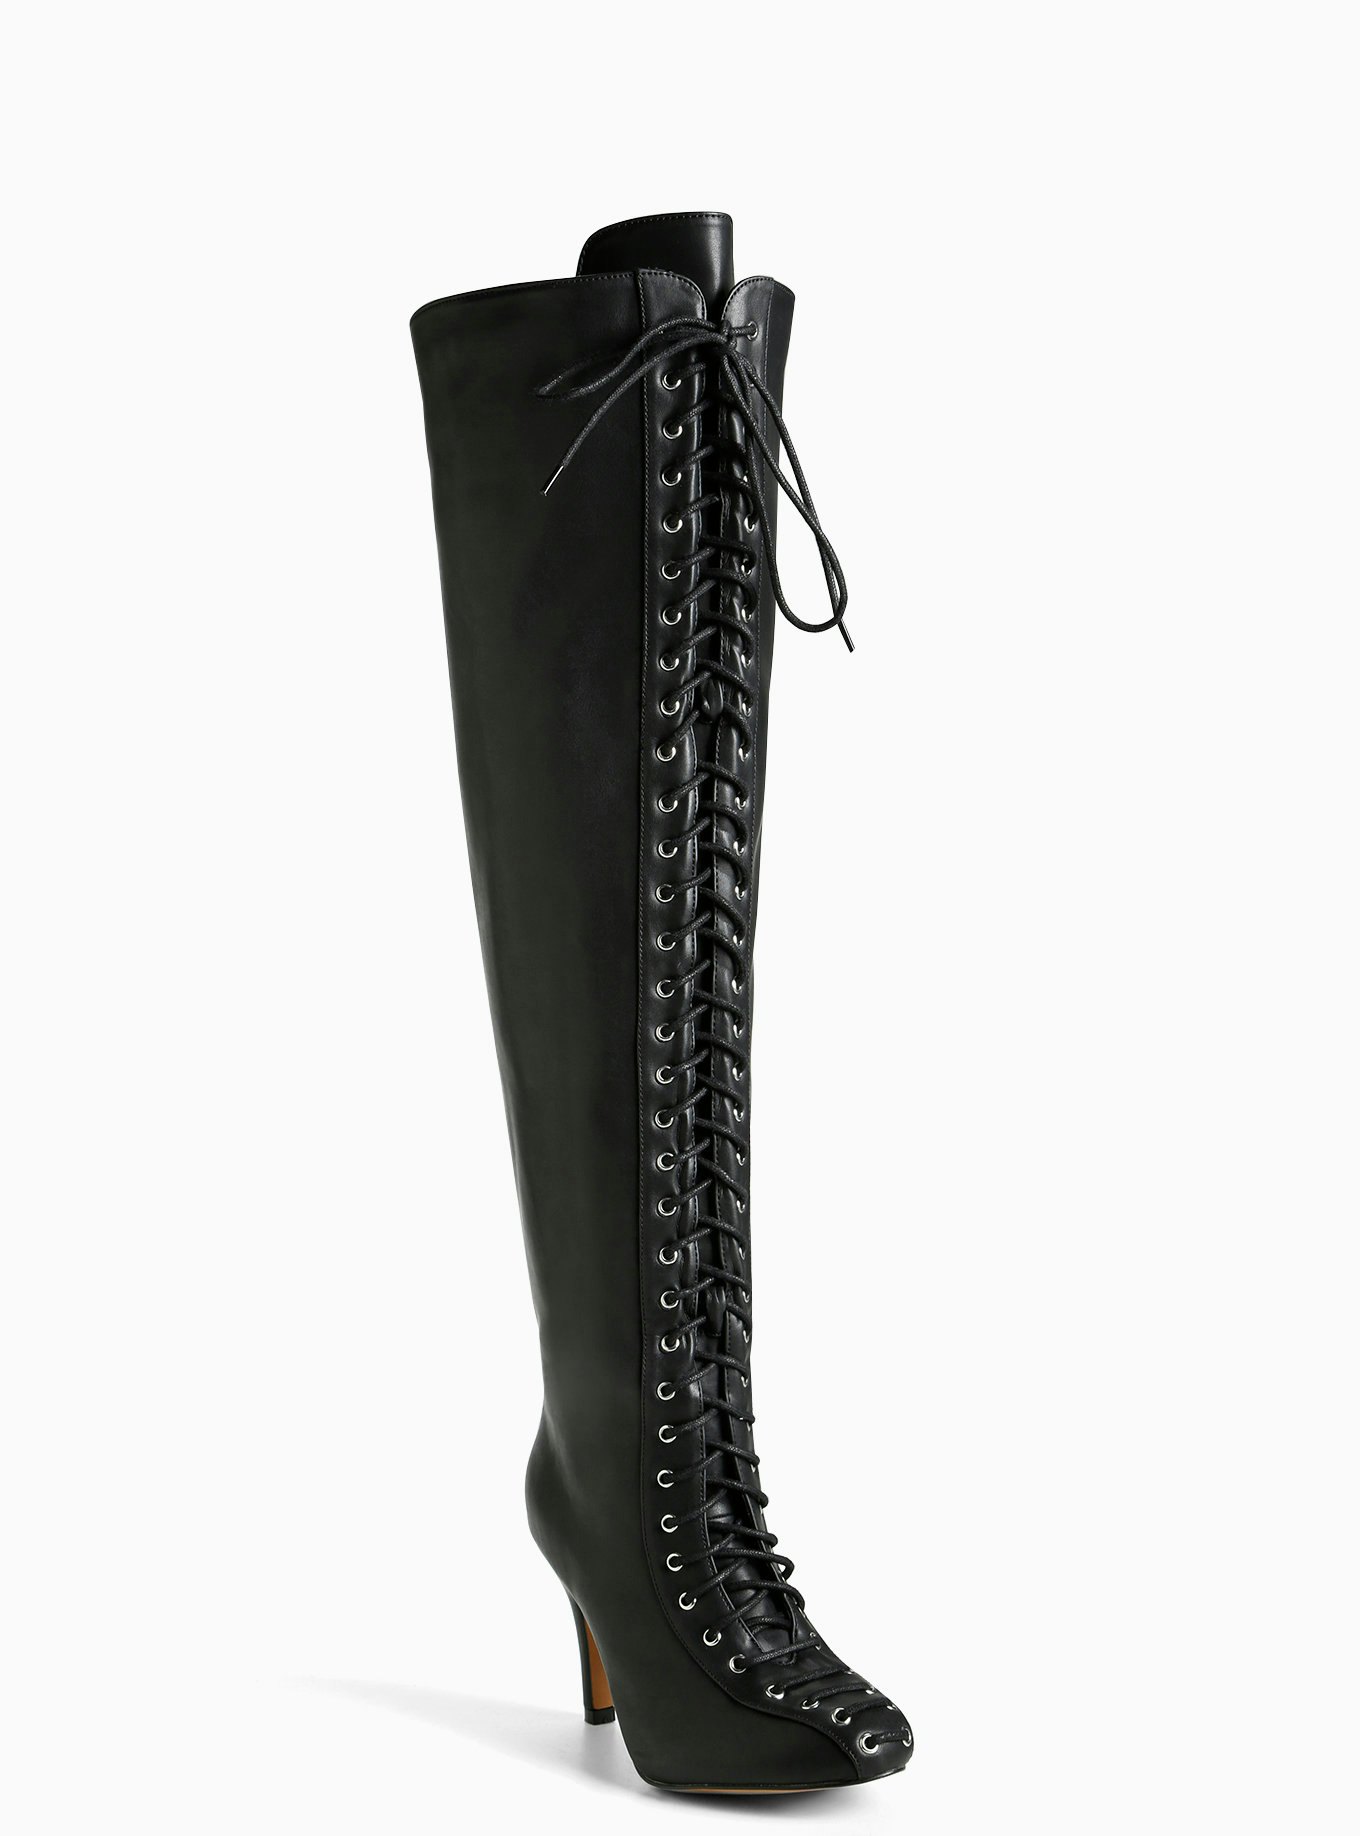 over the knee boots that stay up